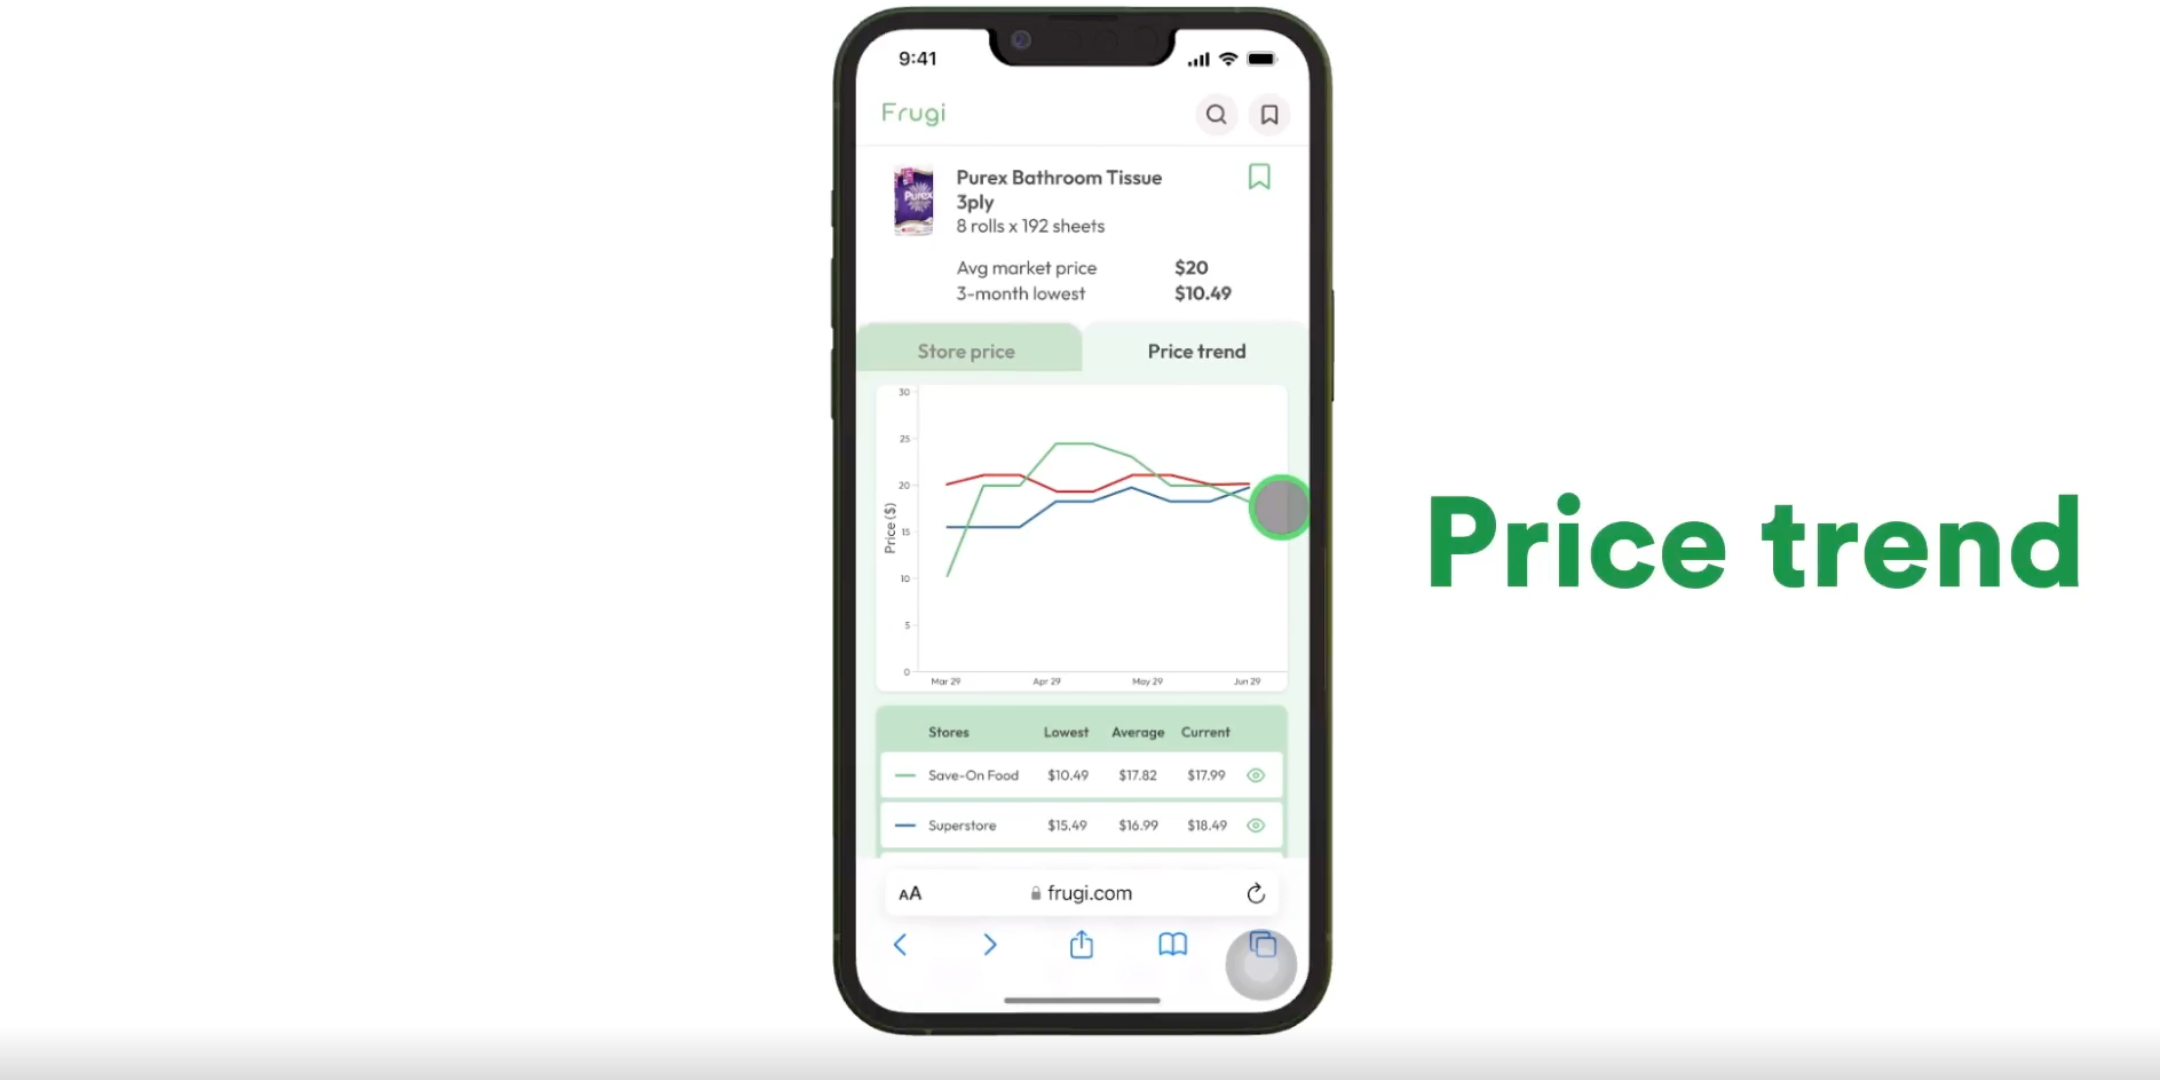 Frugi App showing example of price trends on groceries